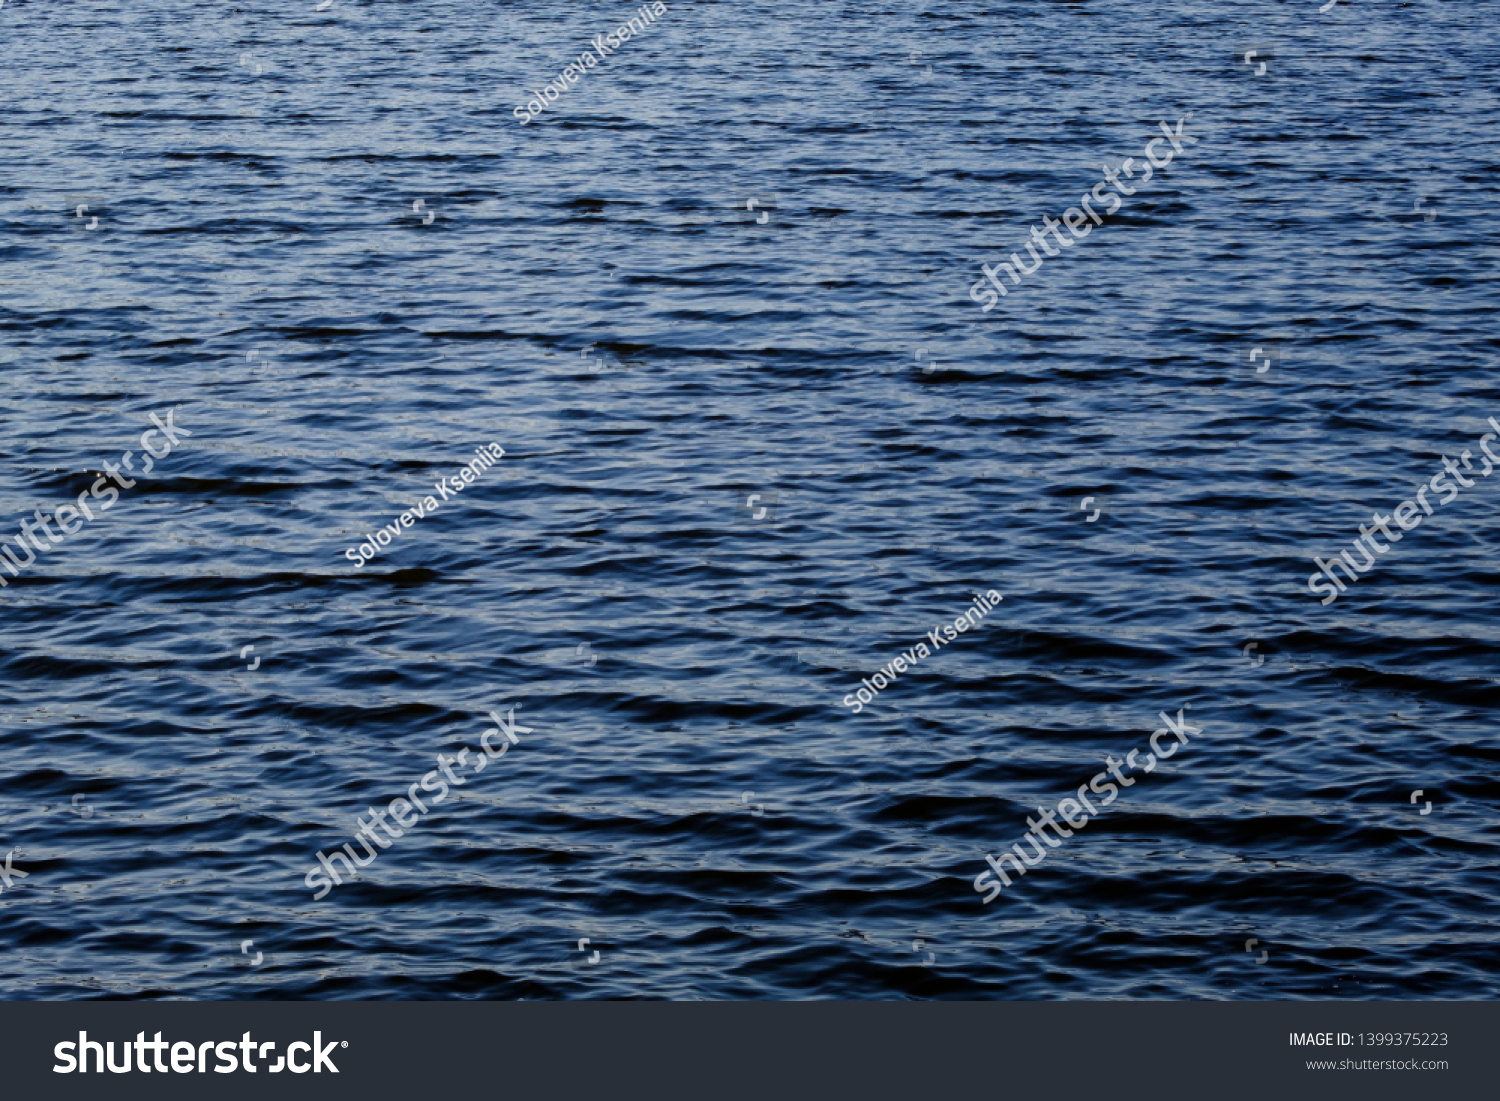 Light playing on the sea surface. Water surface. Sea surface. Water background. Blue water surface.  #1399375223